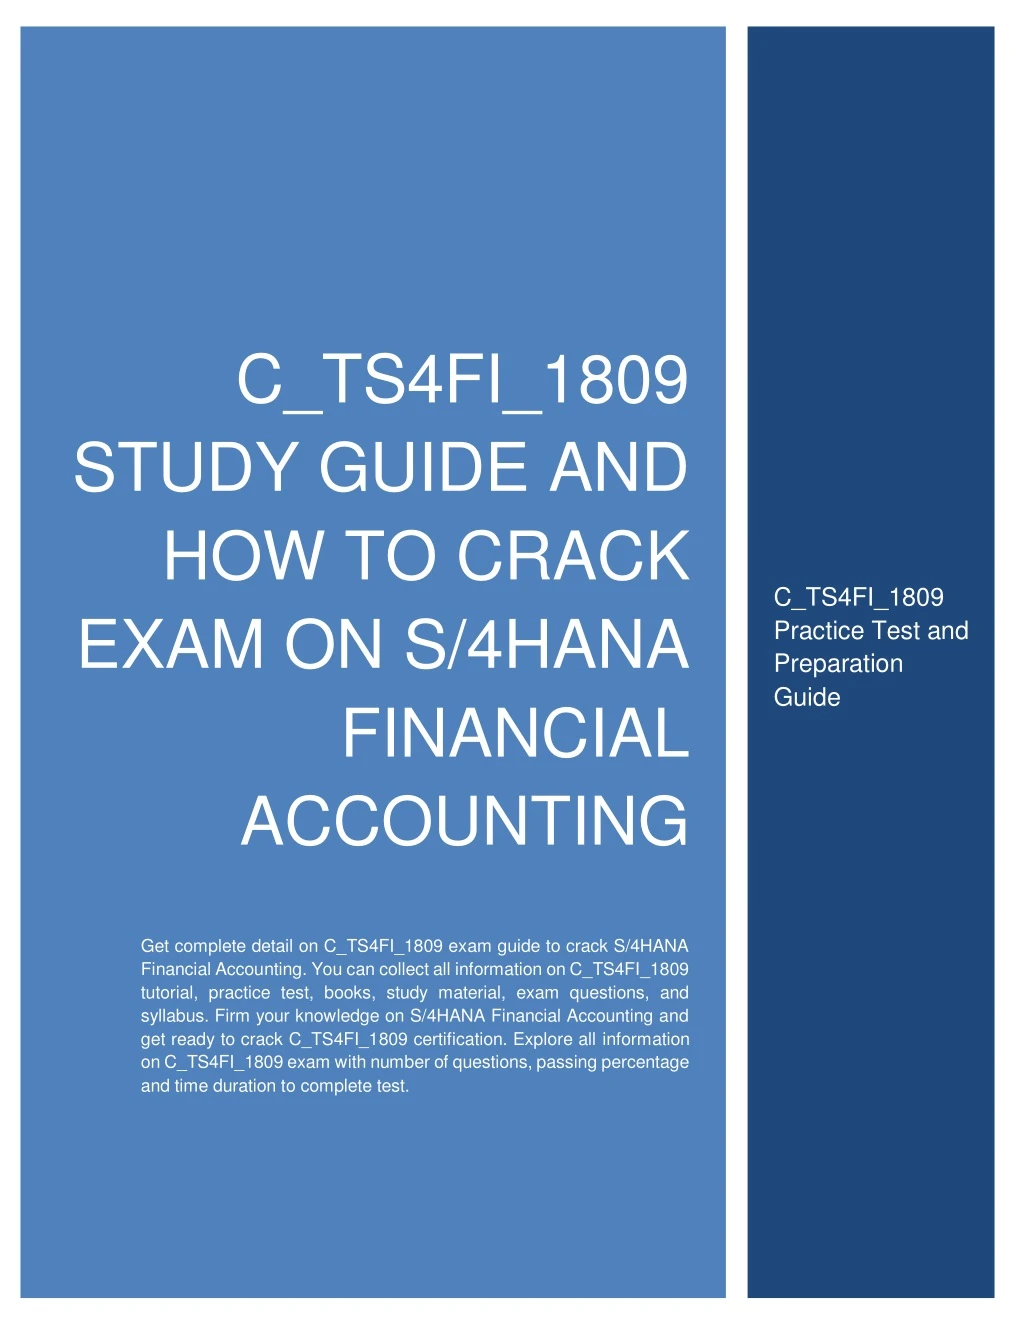 c ts4fi 1809 study guide and how to crack exam